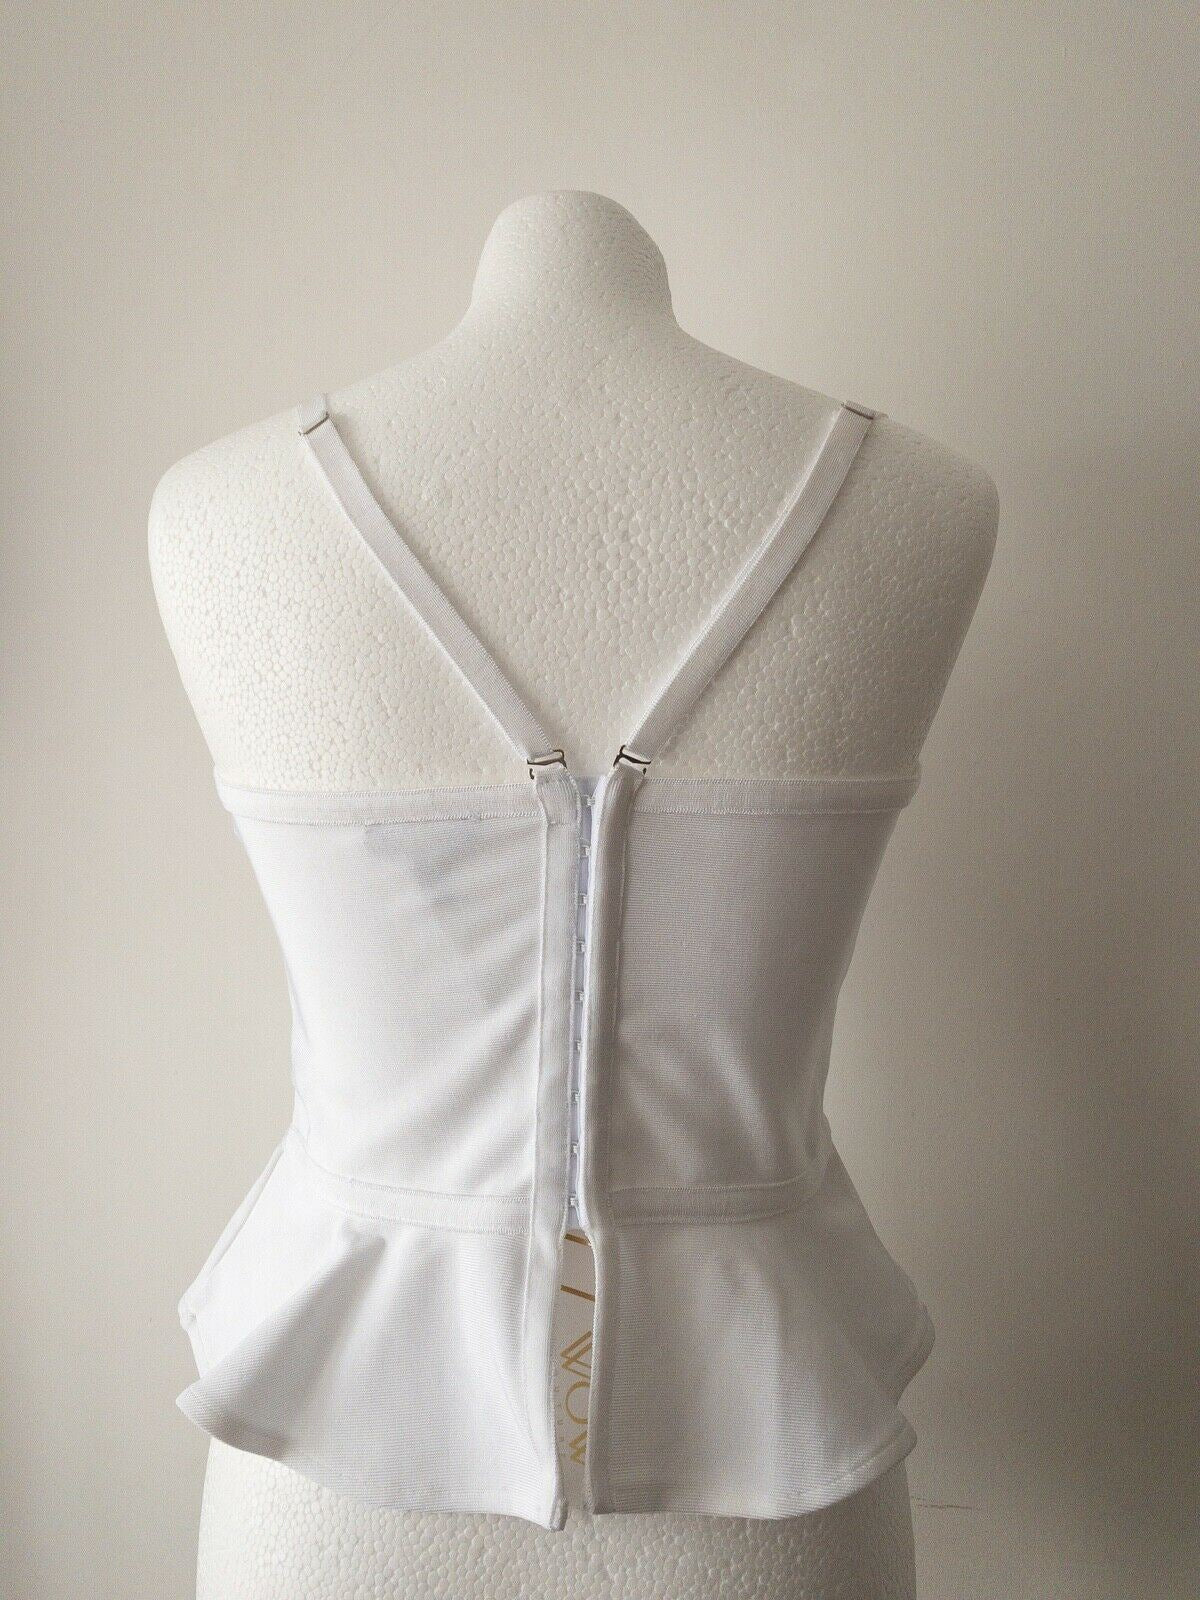 Wow Couture White Cropped Peplum Bandage Corset Top Sizes 6, 8, 10